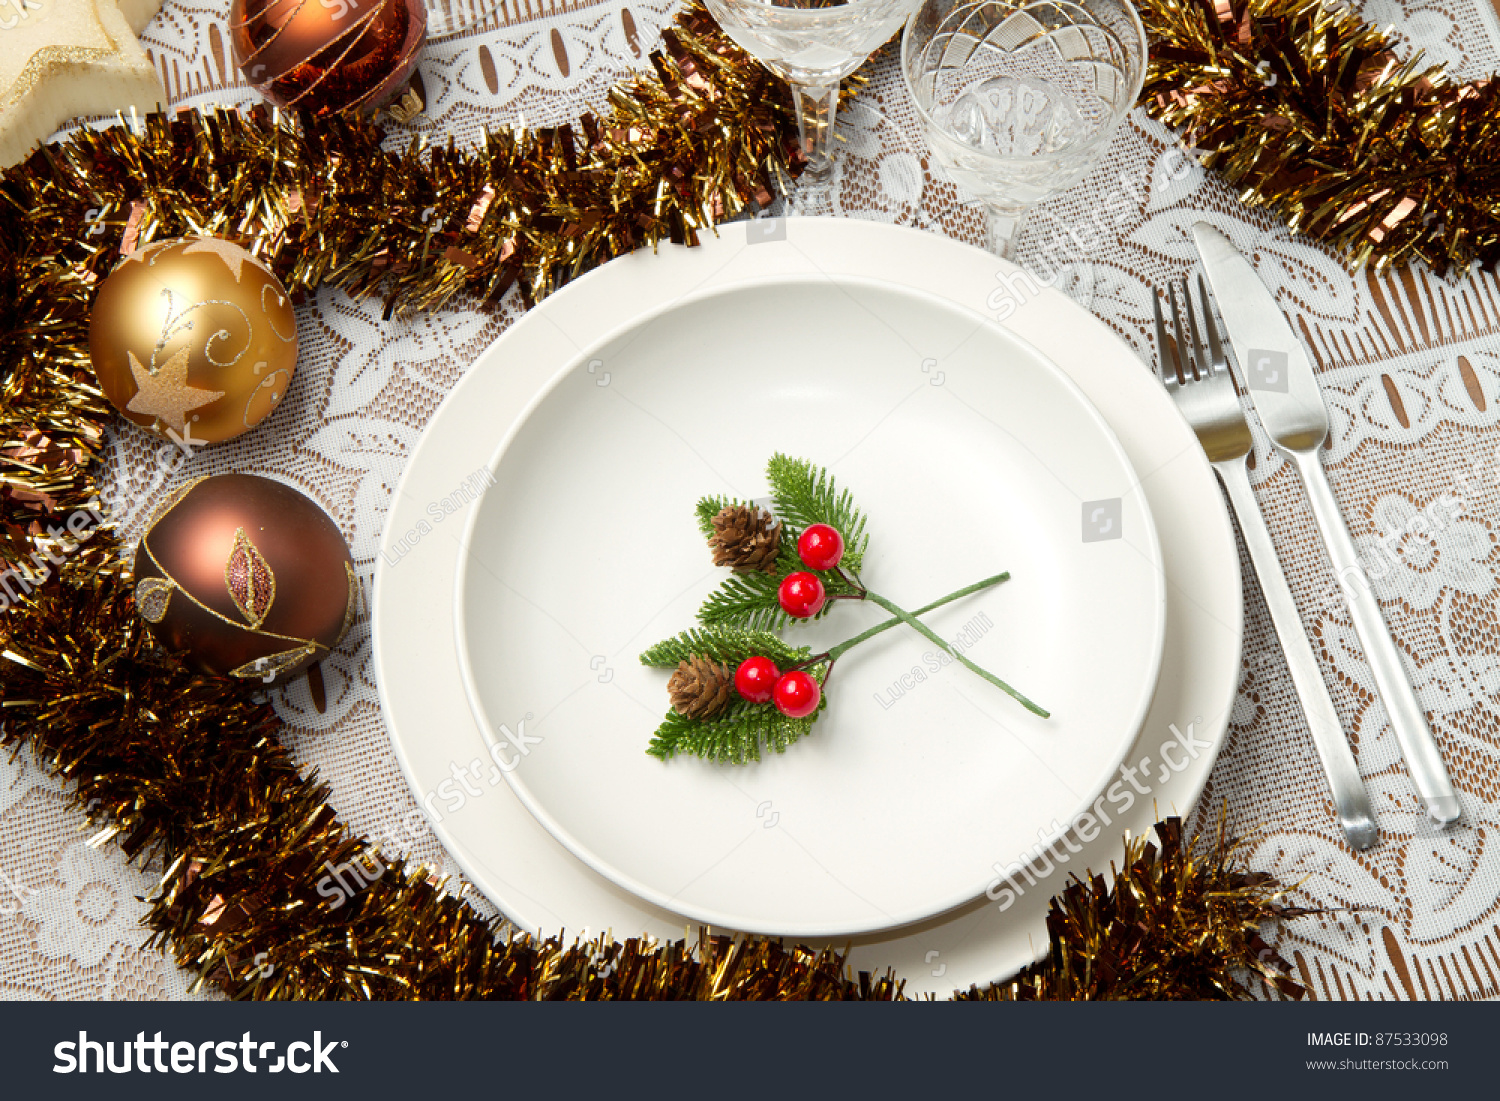 A Decorated Christmas Table Stock Photo 87533098 : Shutterstock